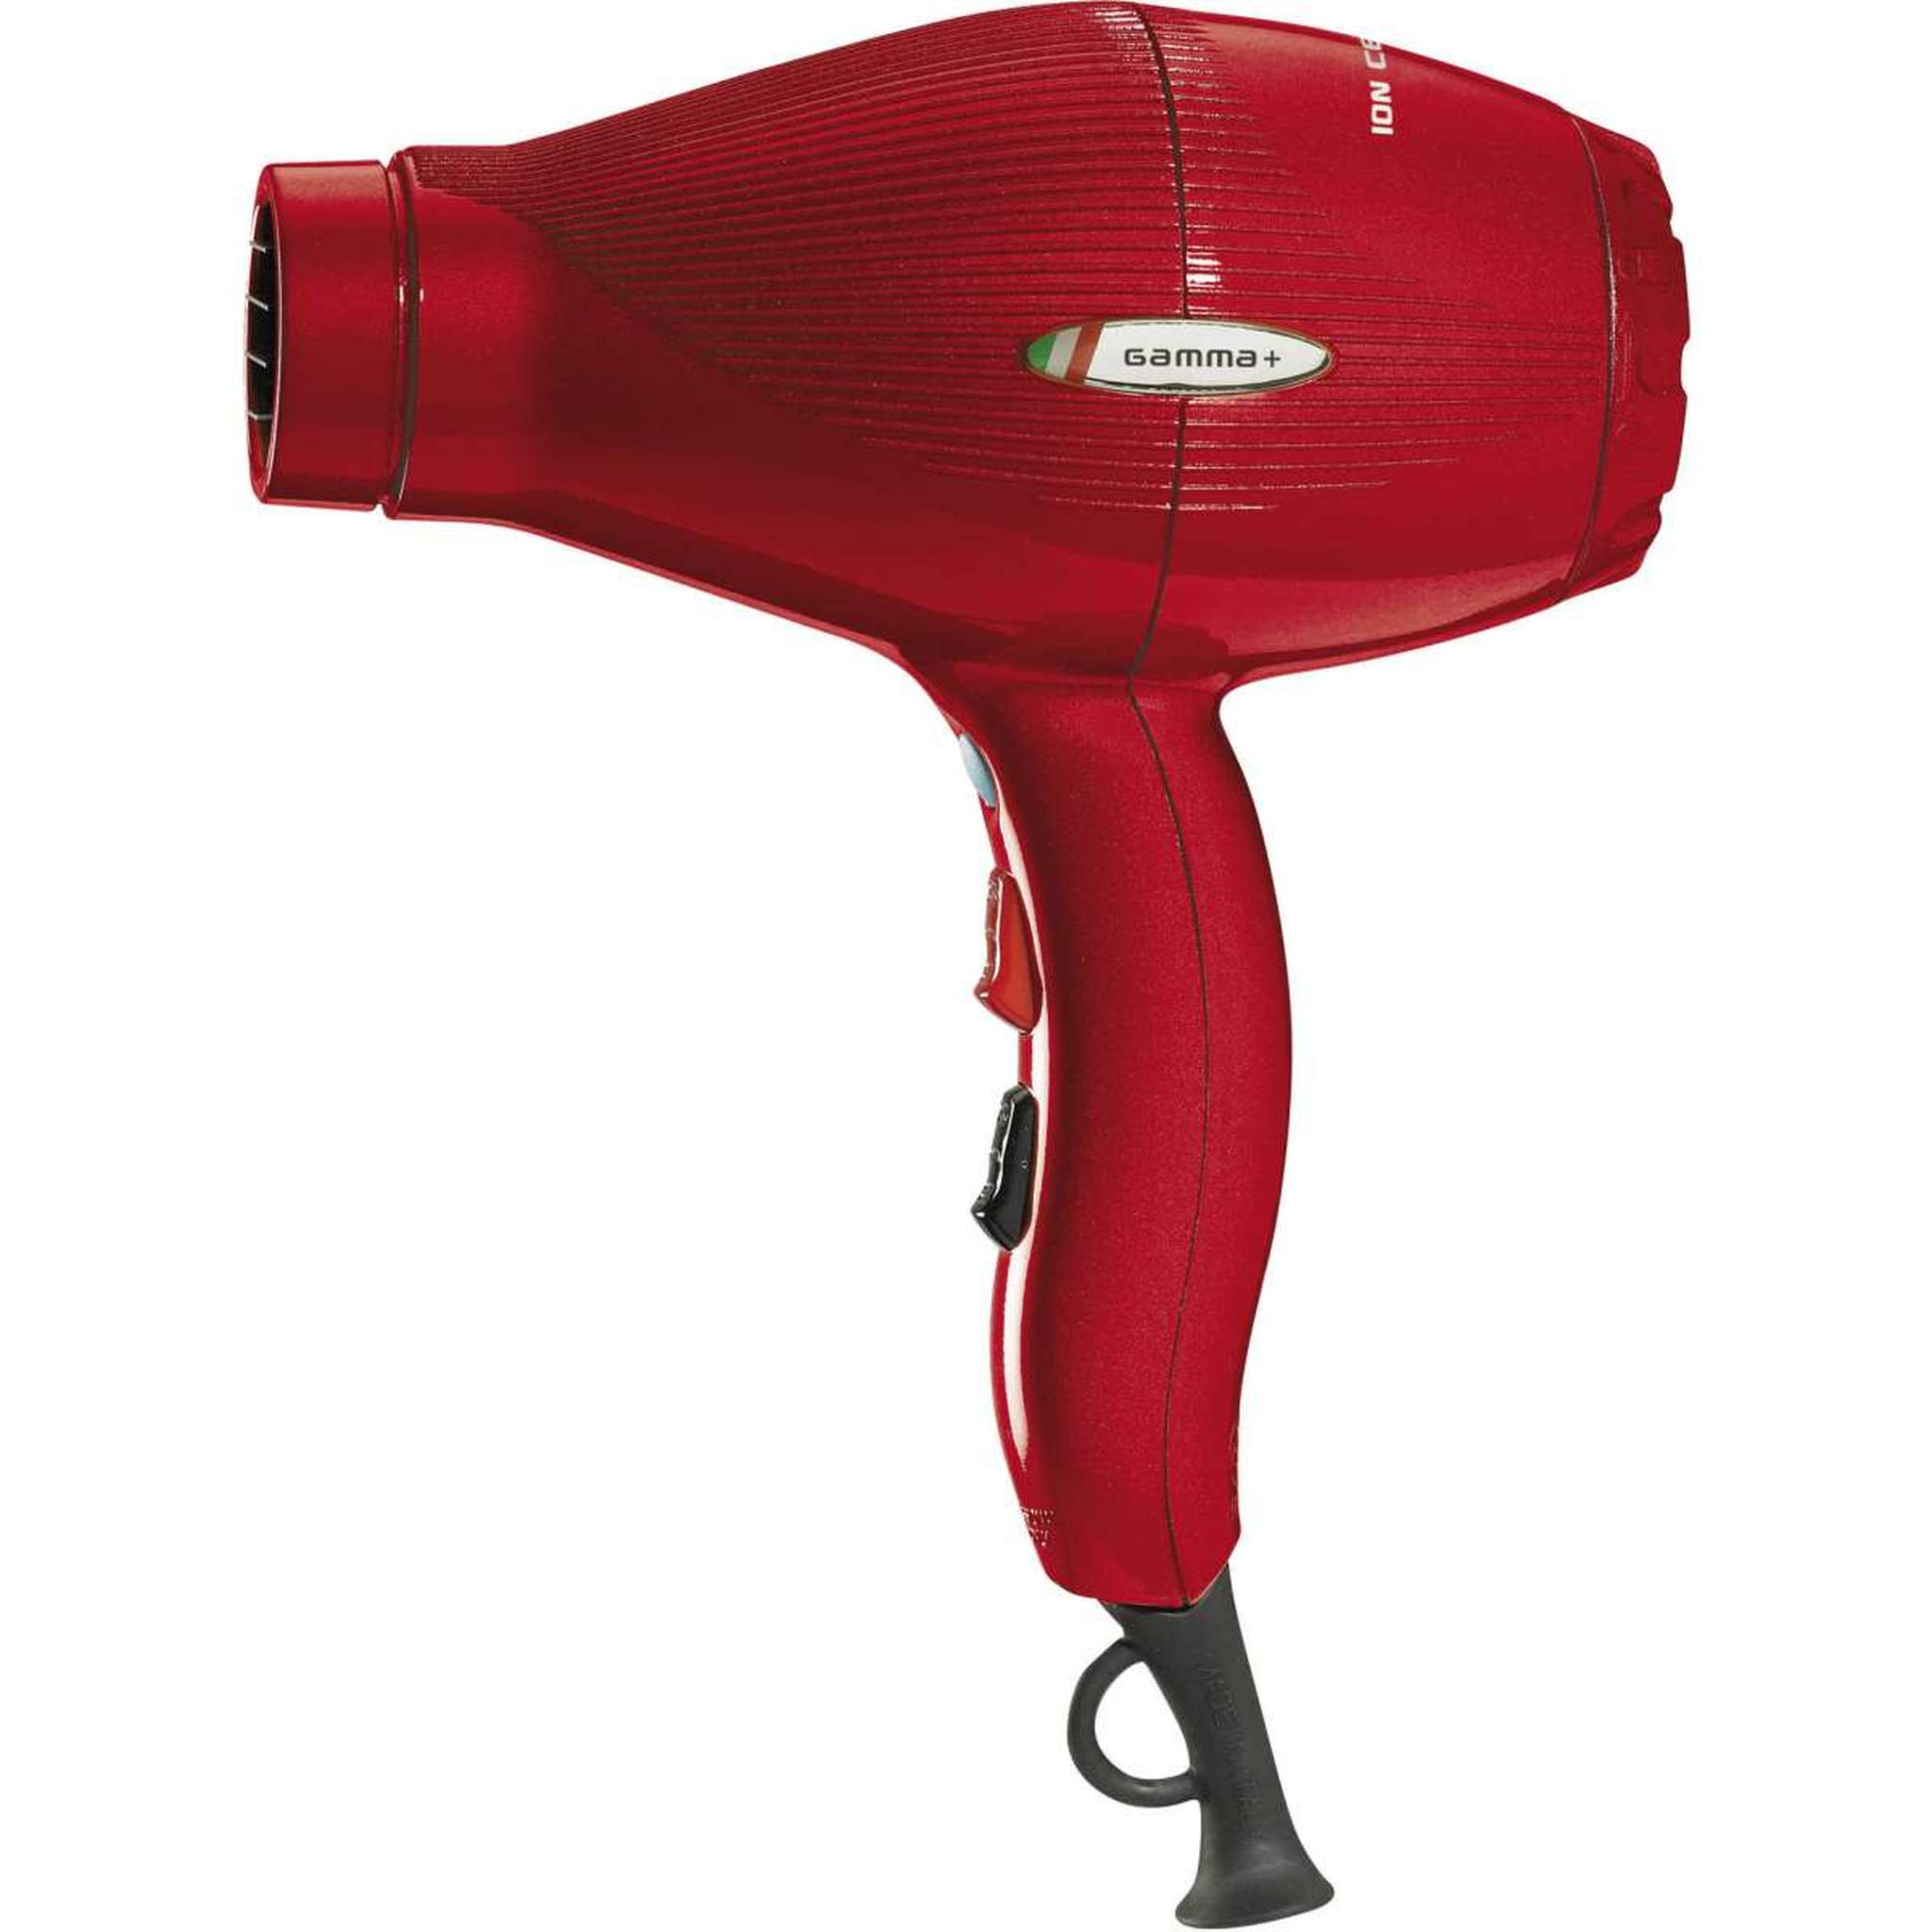 Gamma+ ION Ceramic S 2300W Hair Dryer - Cherry Red - HairBeautyInk